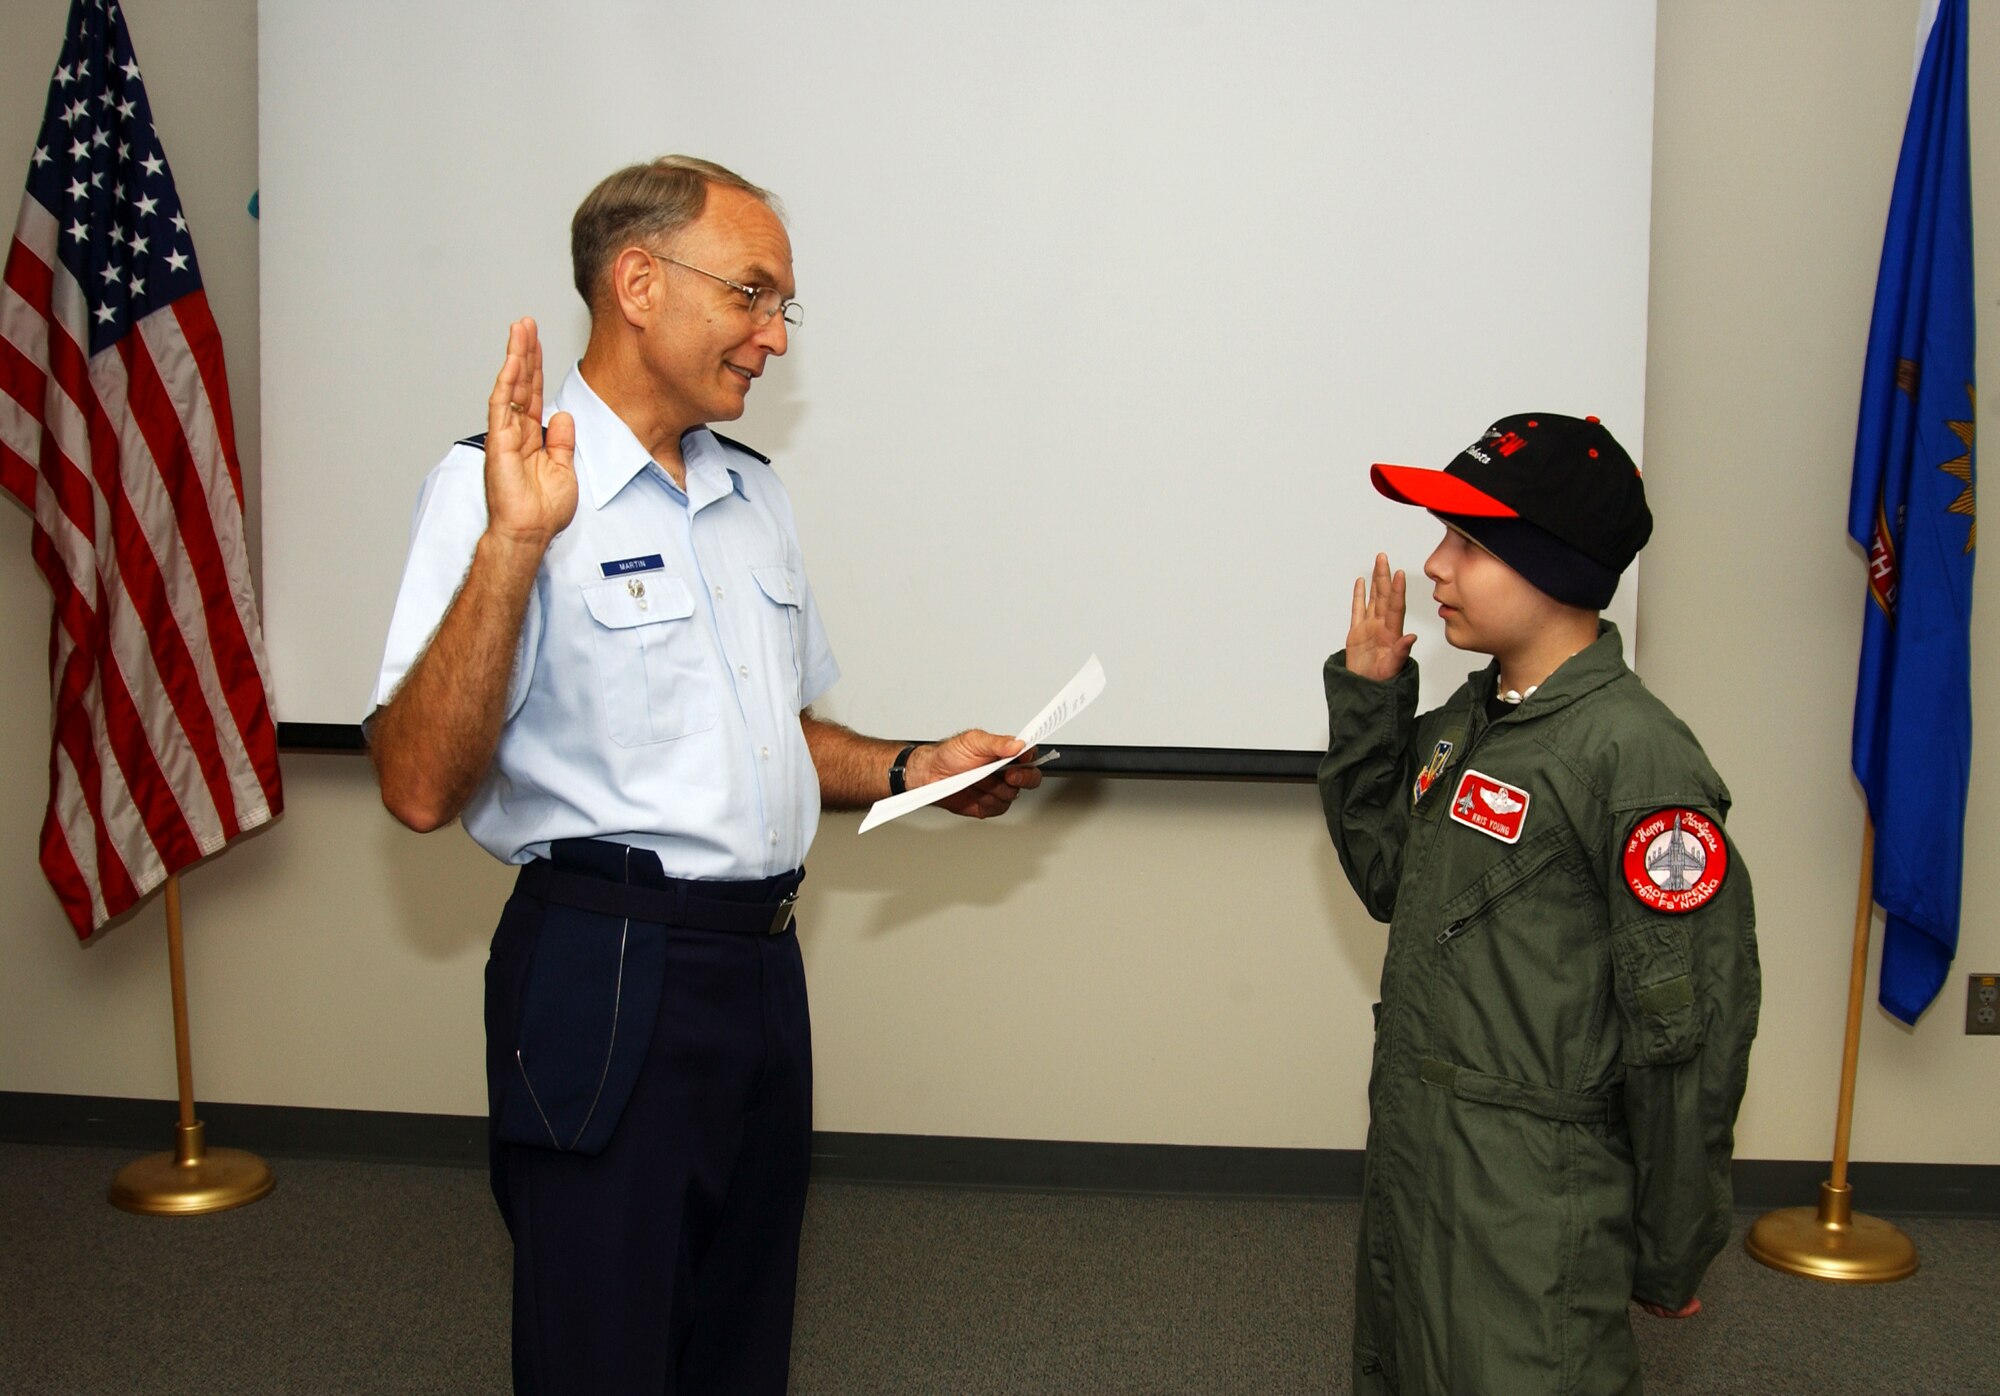 Col. Patrick Martin swears in Kris Young as a "pilot for a day" at the Air National Guard's 119th Fighter Wing in Fargo, N.D., on Friday, June 2, 2006. The pilot for a day program gives children with serious health conditions a day away from medical tests and treatments. Thirteen-year-old Kris, from West Fargo, N.D., has Burkitt's lymphoma, a type of cancer. He has two uncles in the Air Force, one in the Marines, one in the Coast Guard and one in the Army. Colonel Martin is vice commander of the 119th FW. (U.S. Air Force photo/Senior Master Sgt. David H. Lipp)